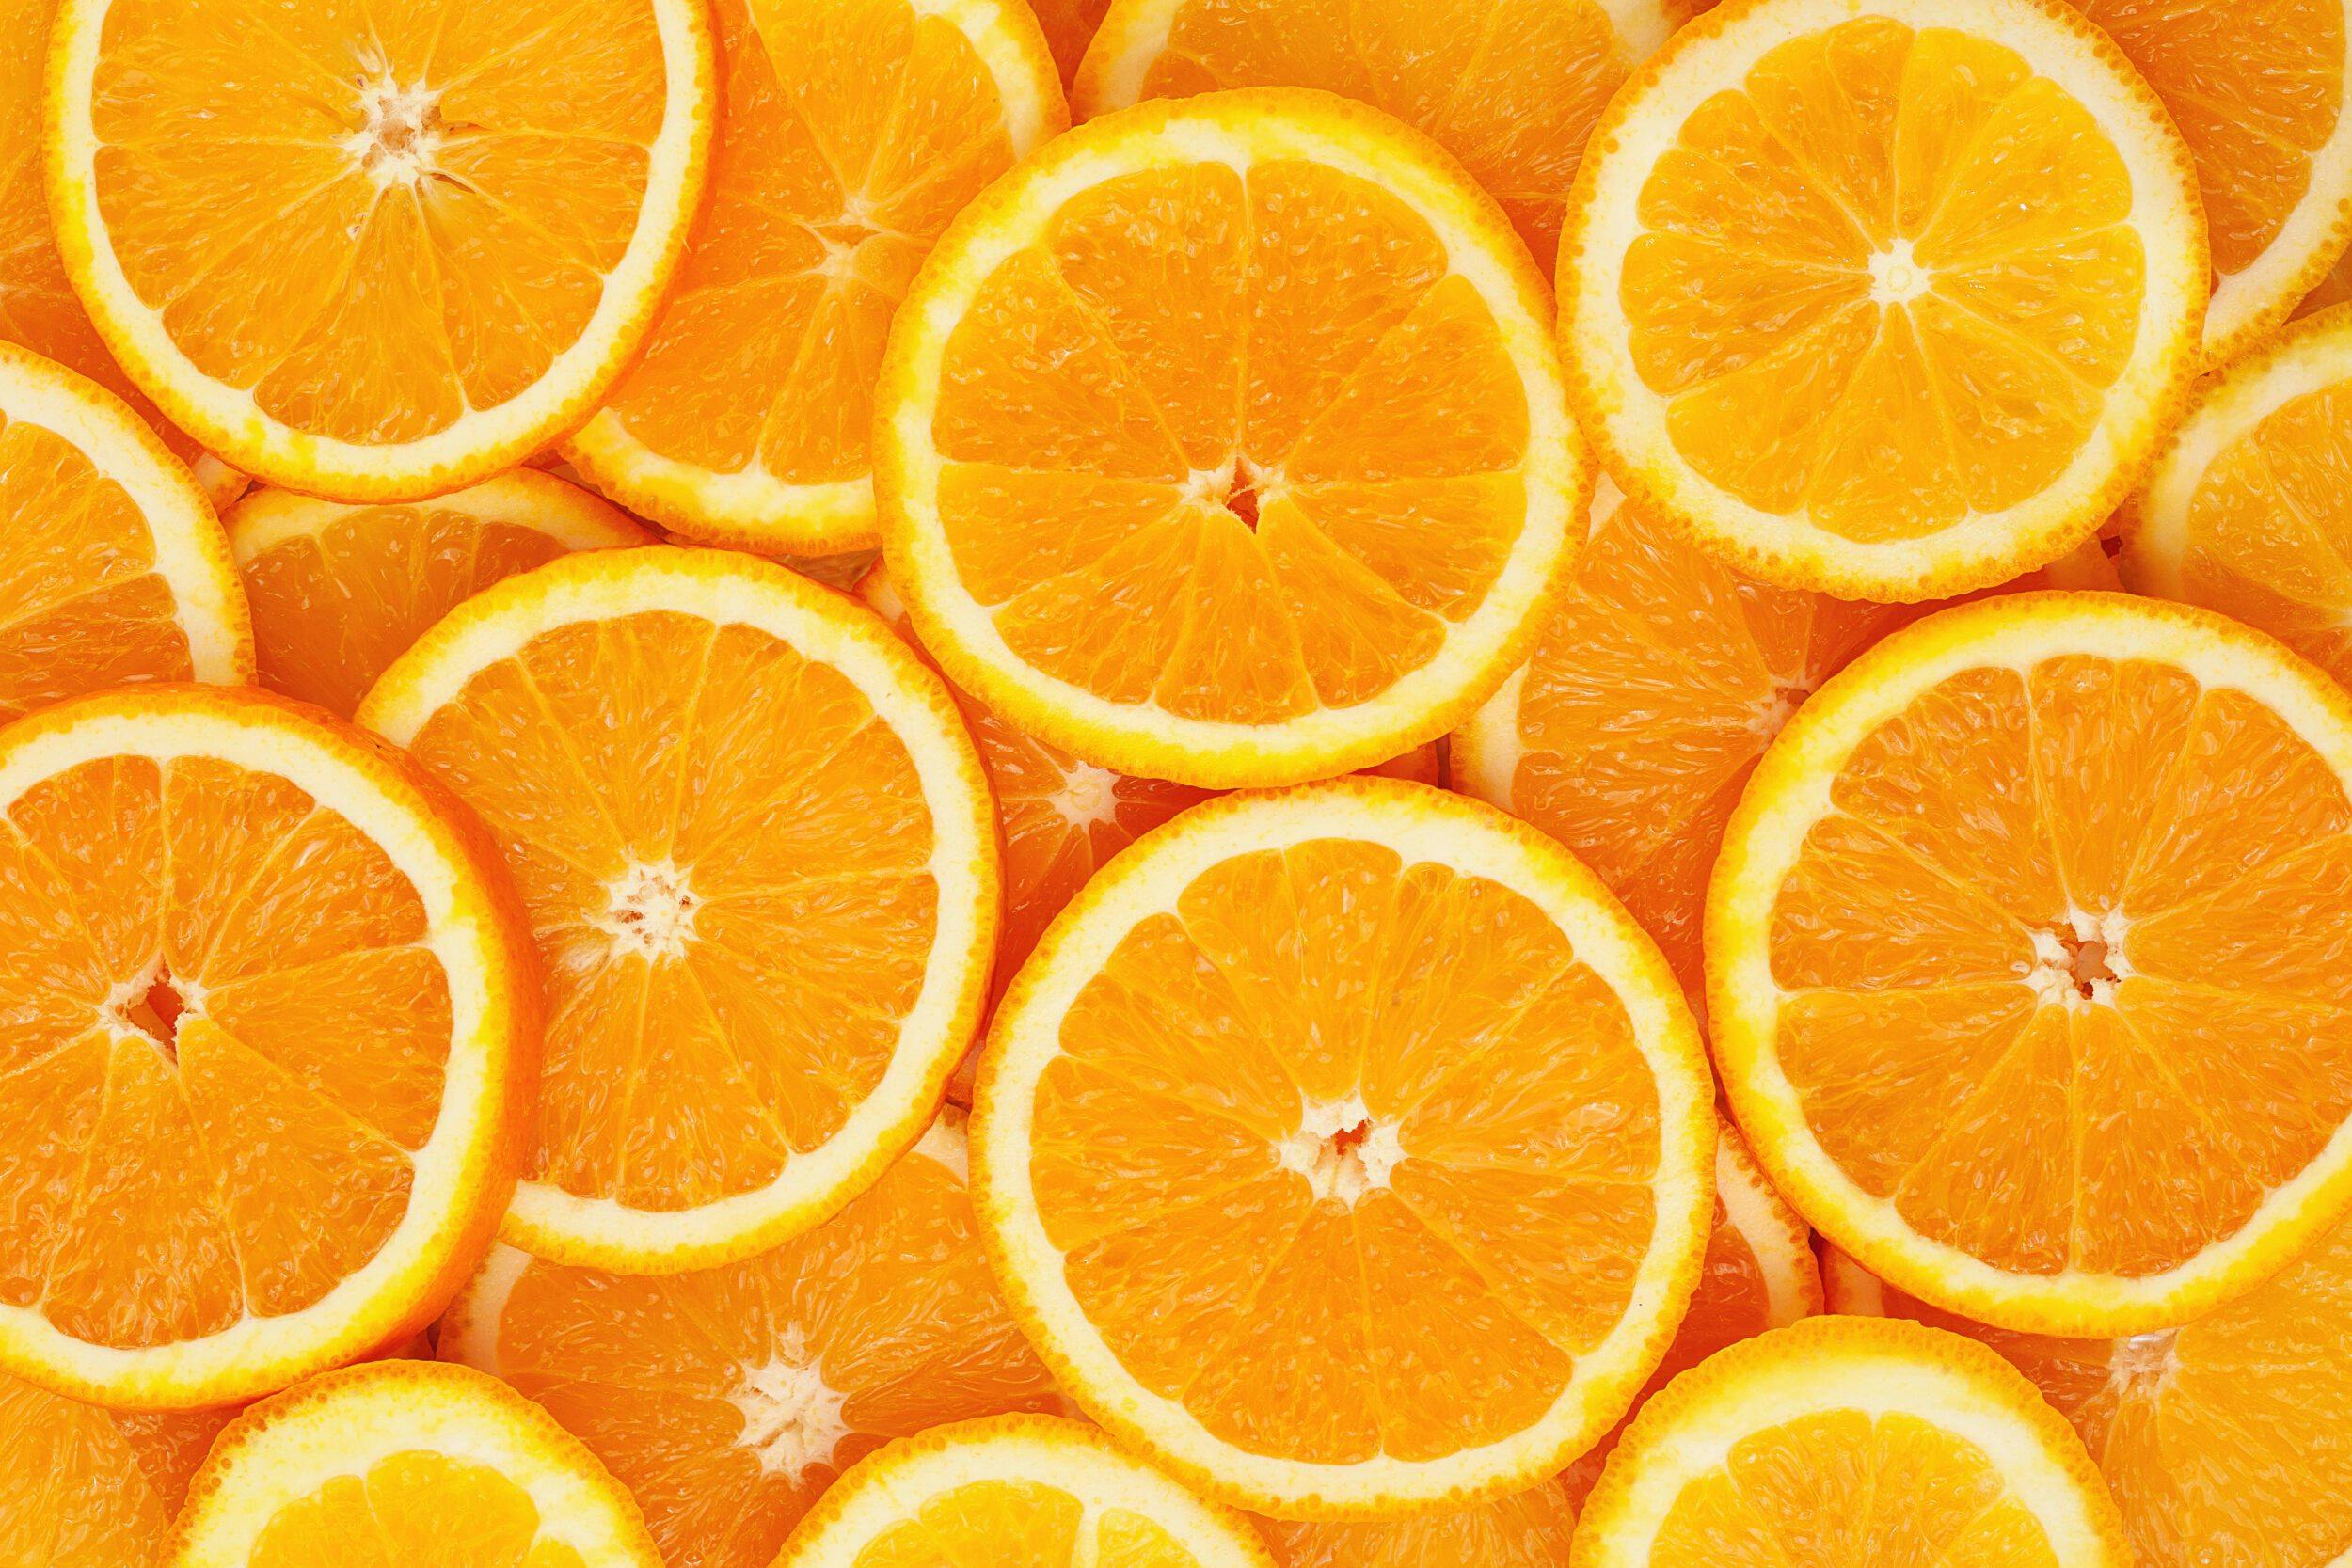 A large pile of oranges.